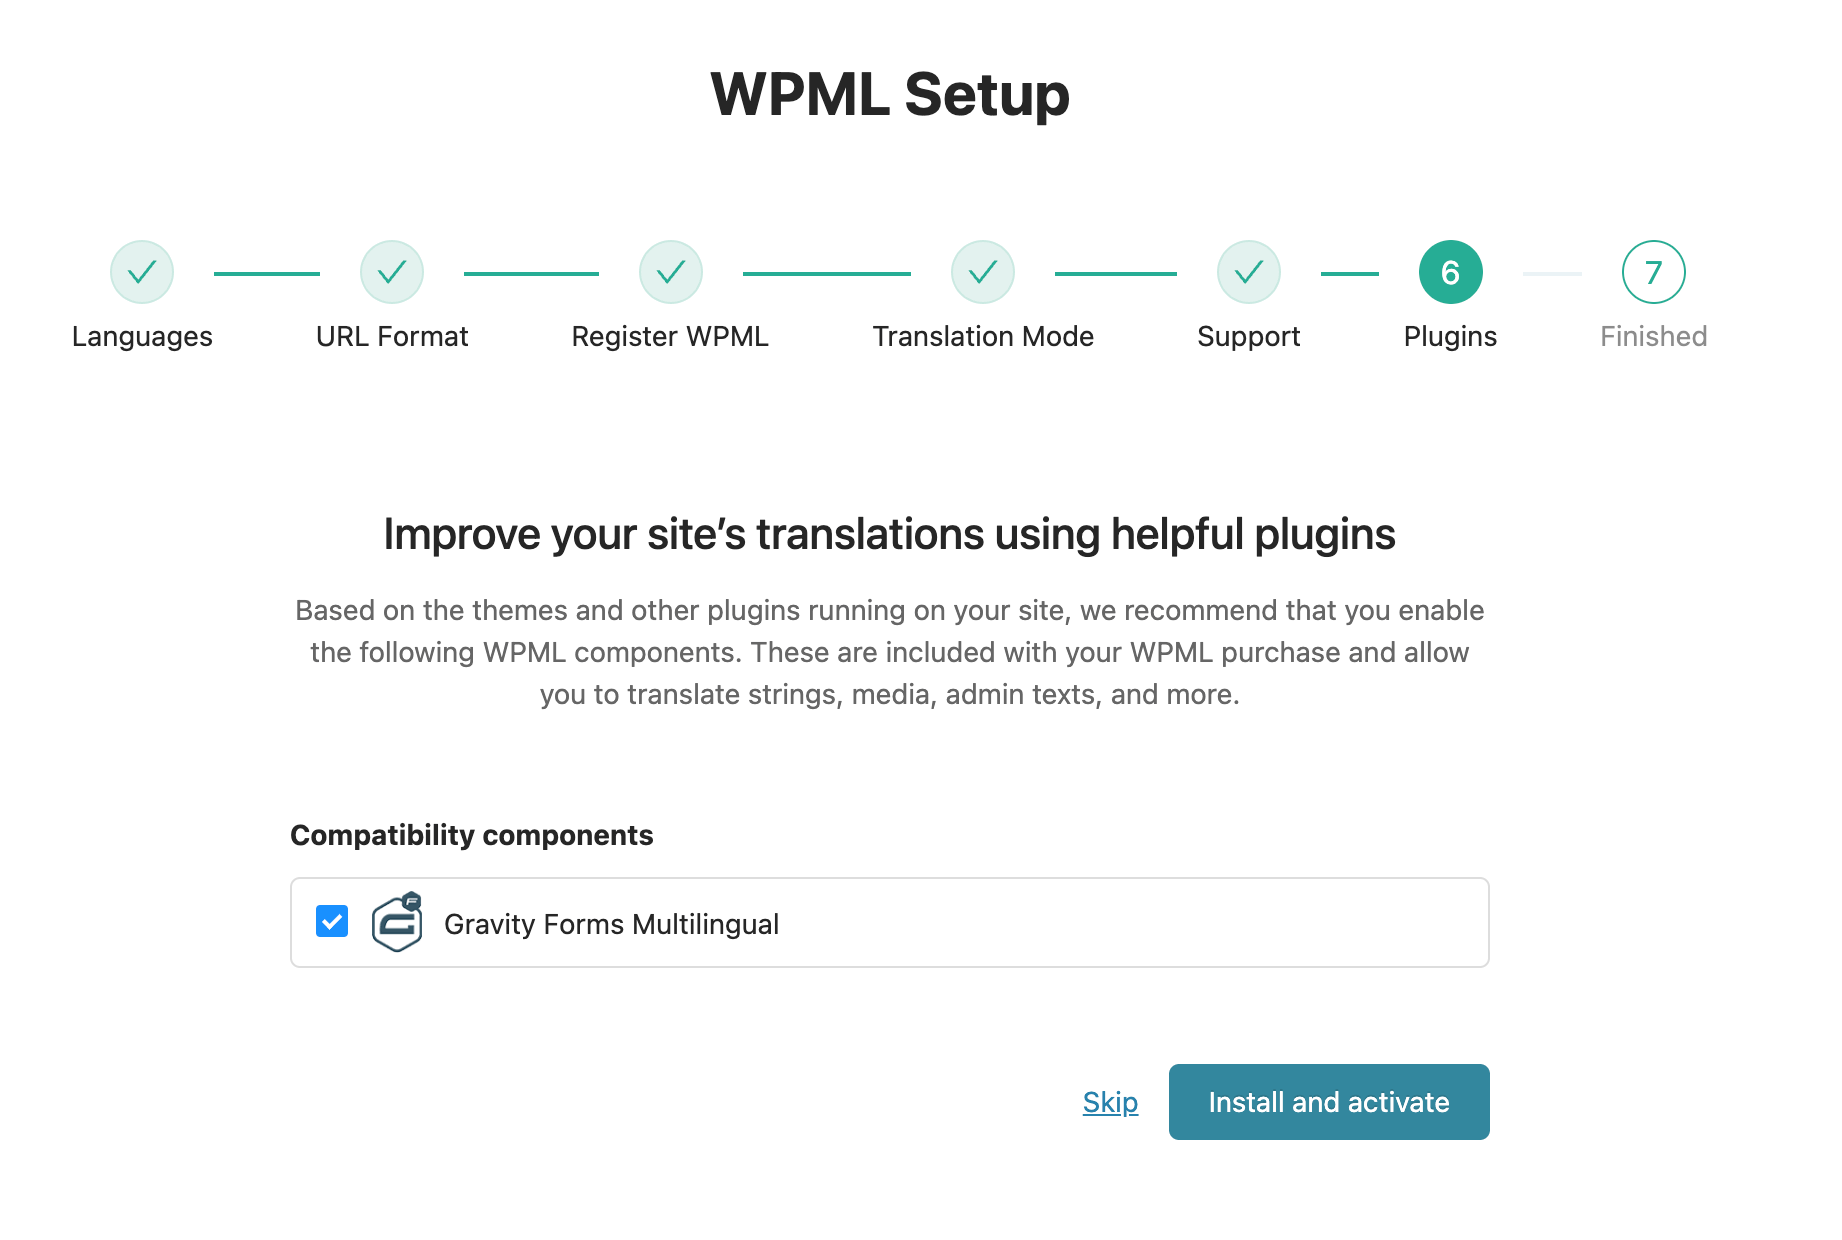 wpml-setup-wizard-install-gravity-forms-multilingual